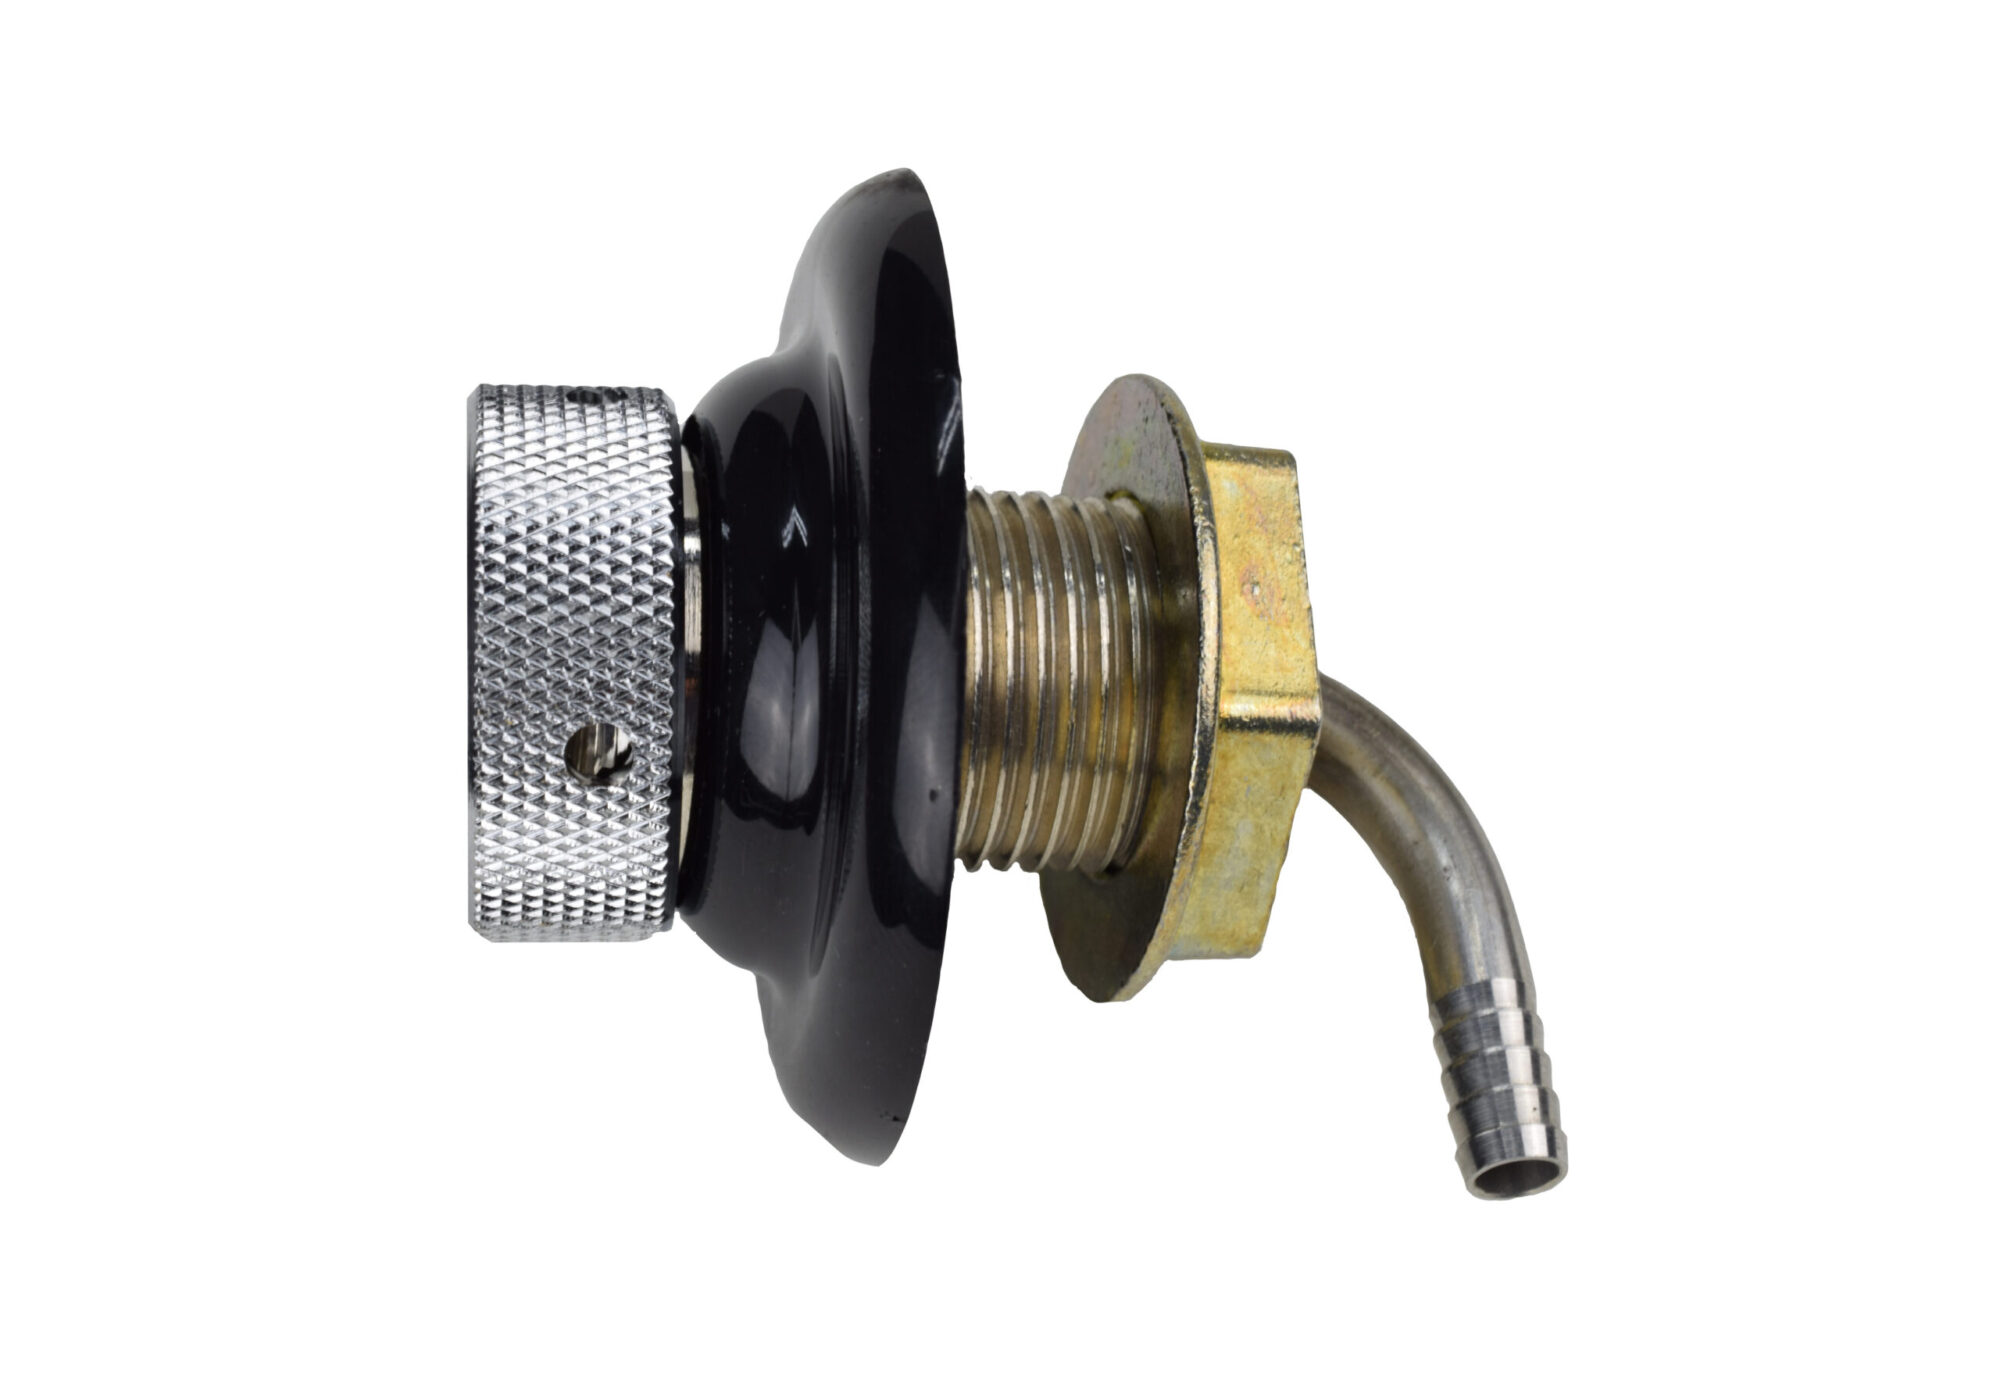 1331CXSA Complete Stainless Steel Shank with 1/4" Barbed Elbow and Black Plastic Flange